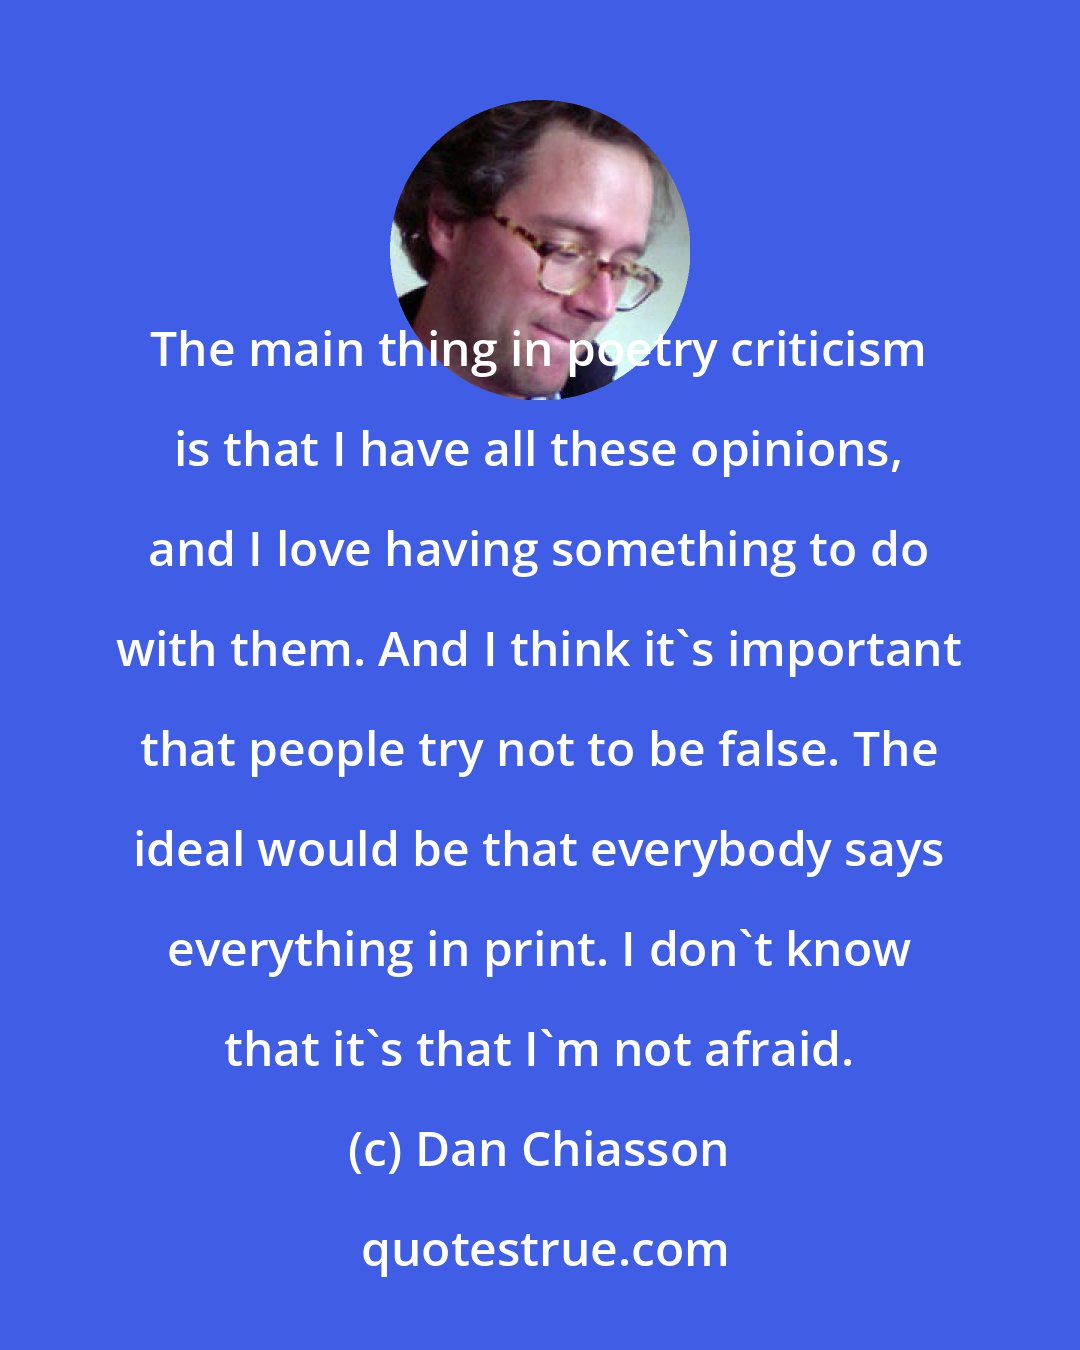 Dan Chiasson: The main thing in poetry criticism is that I have all these opinions, and I love having something to do with them. And I think it's important that people try not to be false. The ideal would be that everybody says everything in print. I don't know that it's that I'm not afraid.